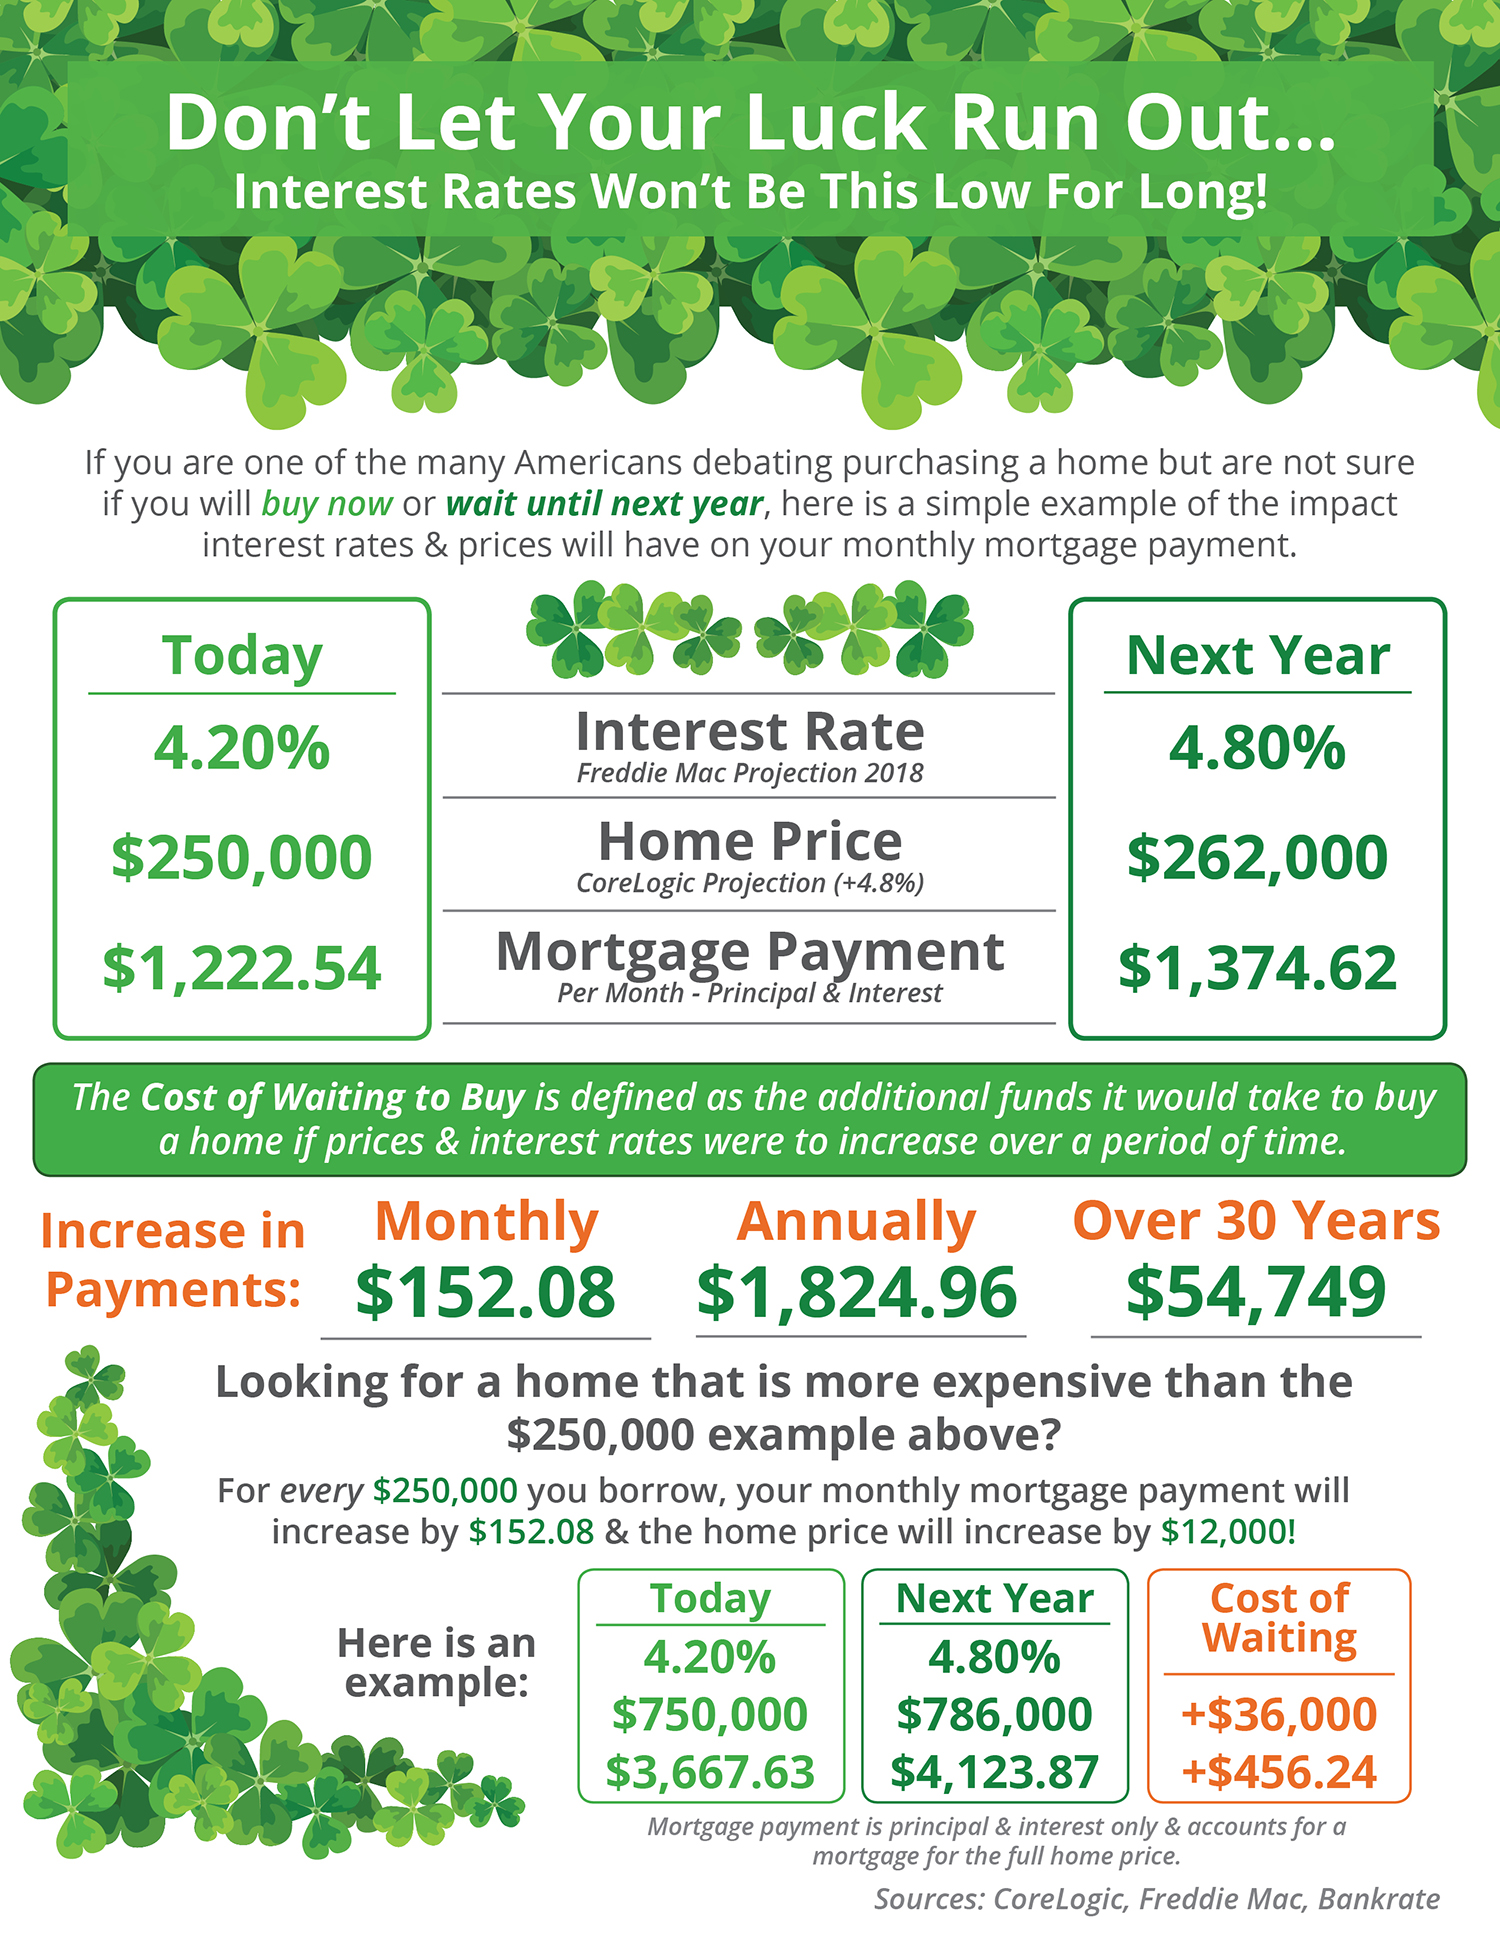 Don’t Let Your Luck Run Out [INFOGRAPHIC] | Simplifying The Market